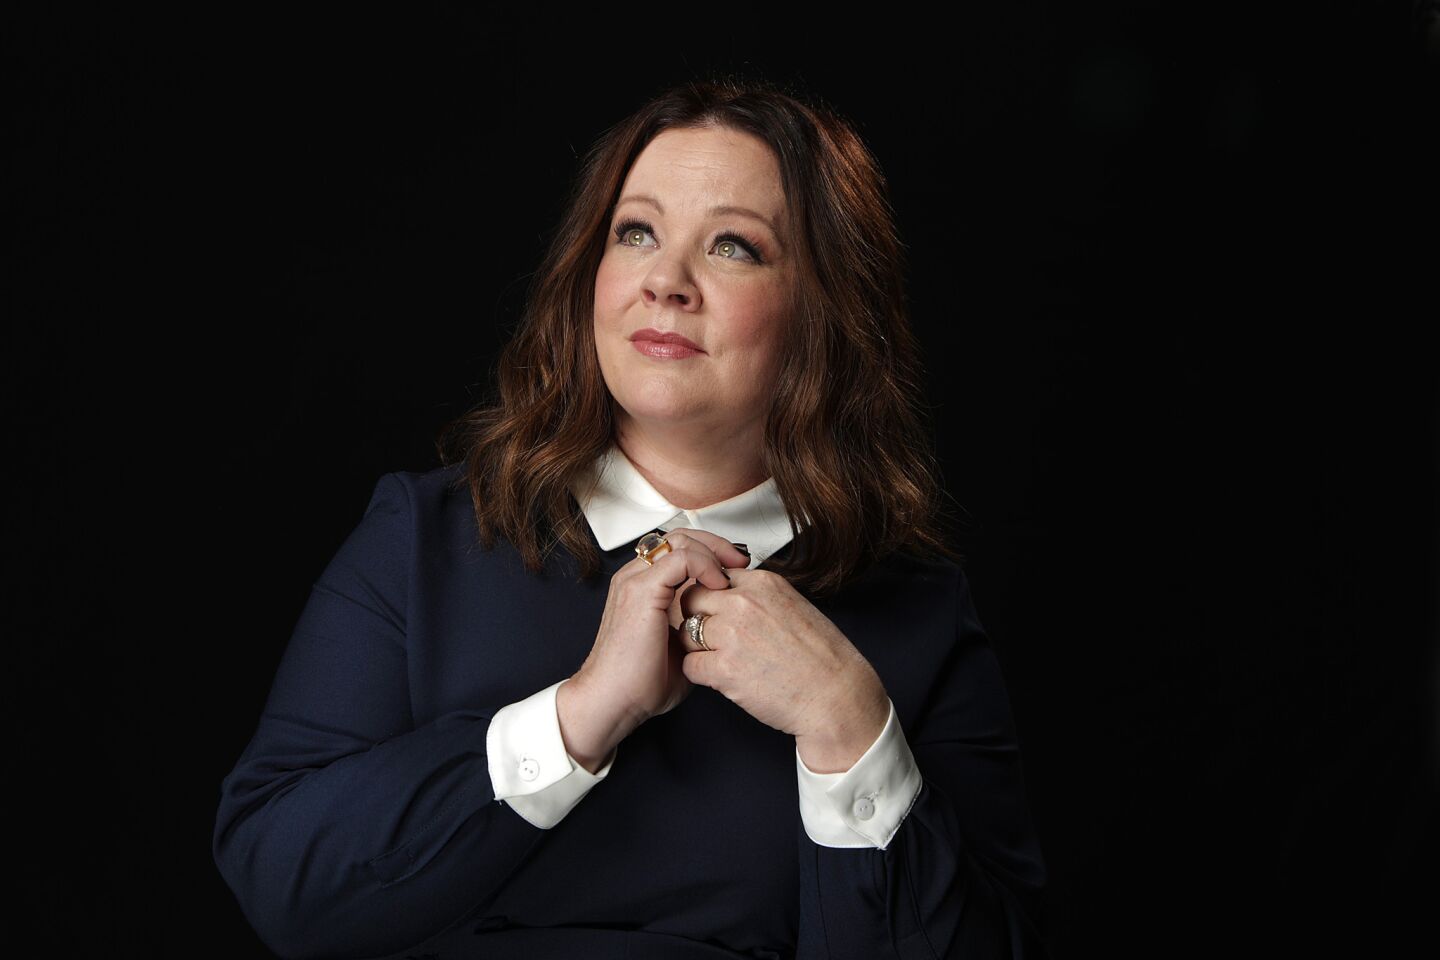 Earning her second nomination and first in this category, Melissa McCarthy was previously nominated for the comedy hit “Bridesmaids” in 2012. Her current dramatic turn also picked up nominations for a Golden Globe, BAFTA and SAG award.